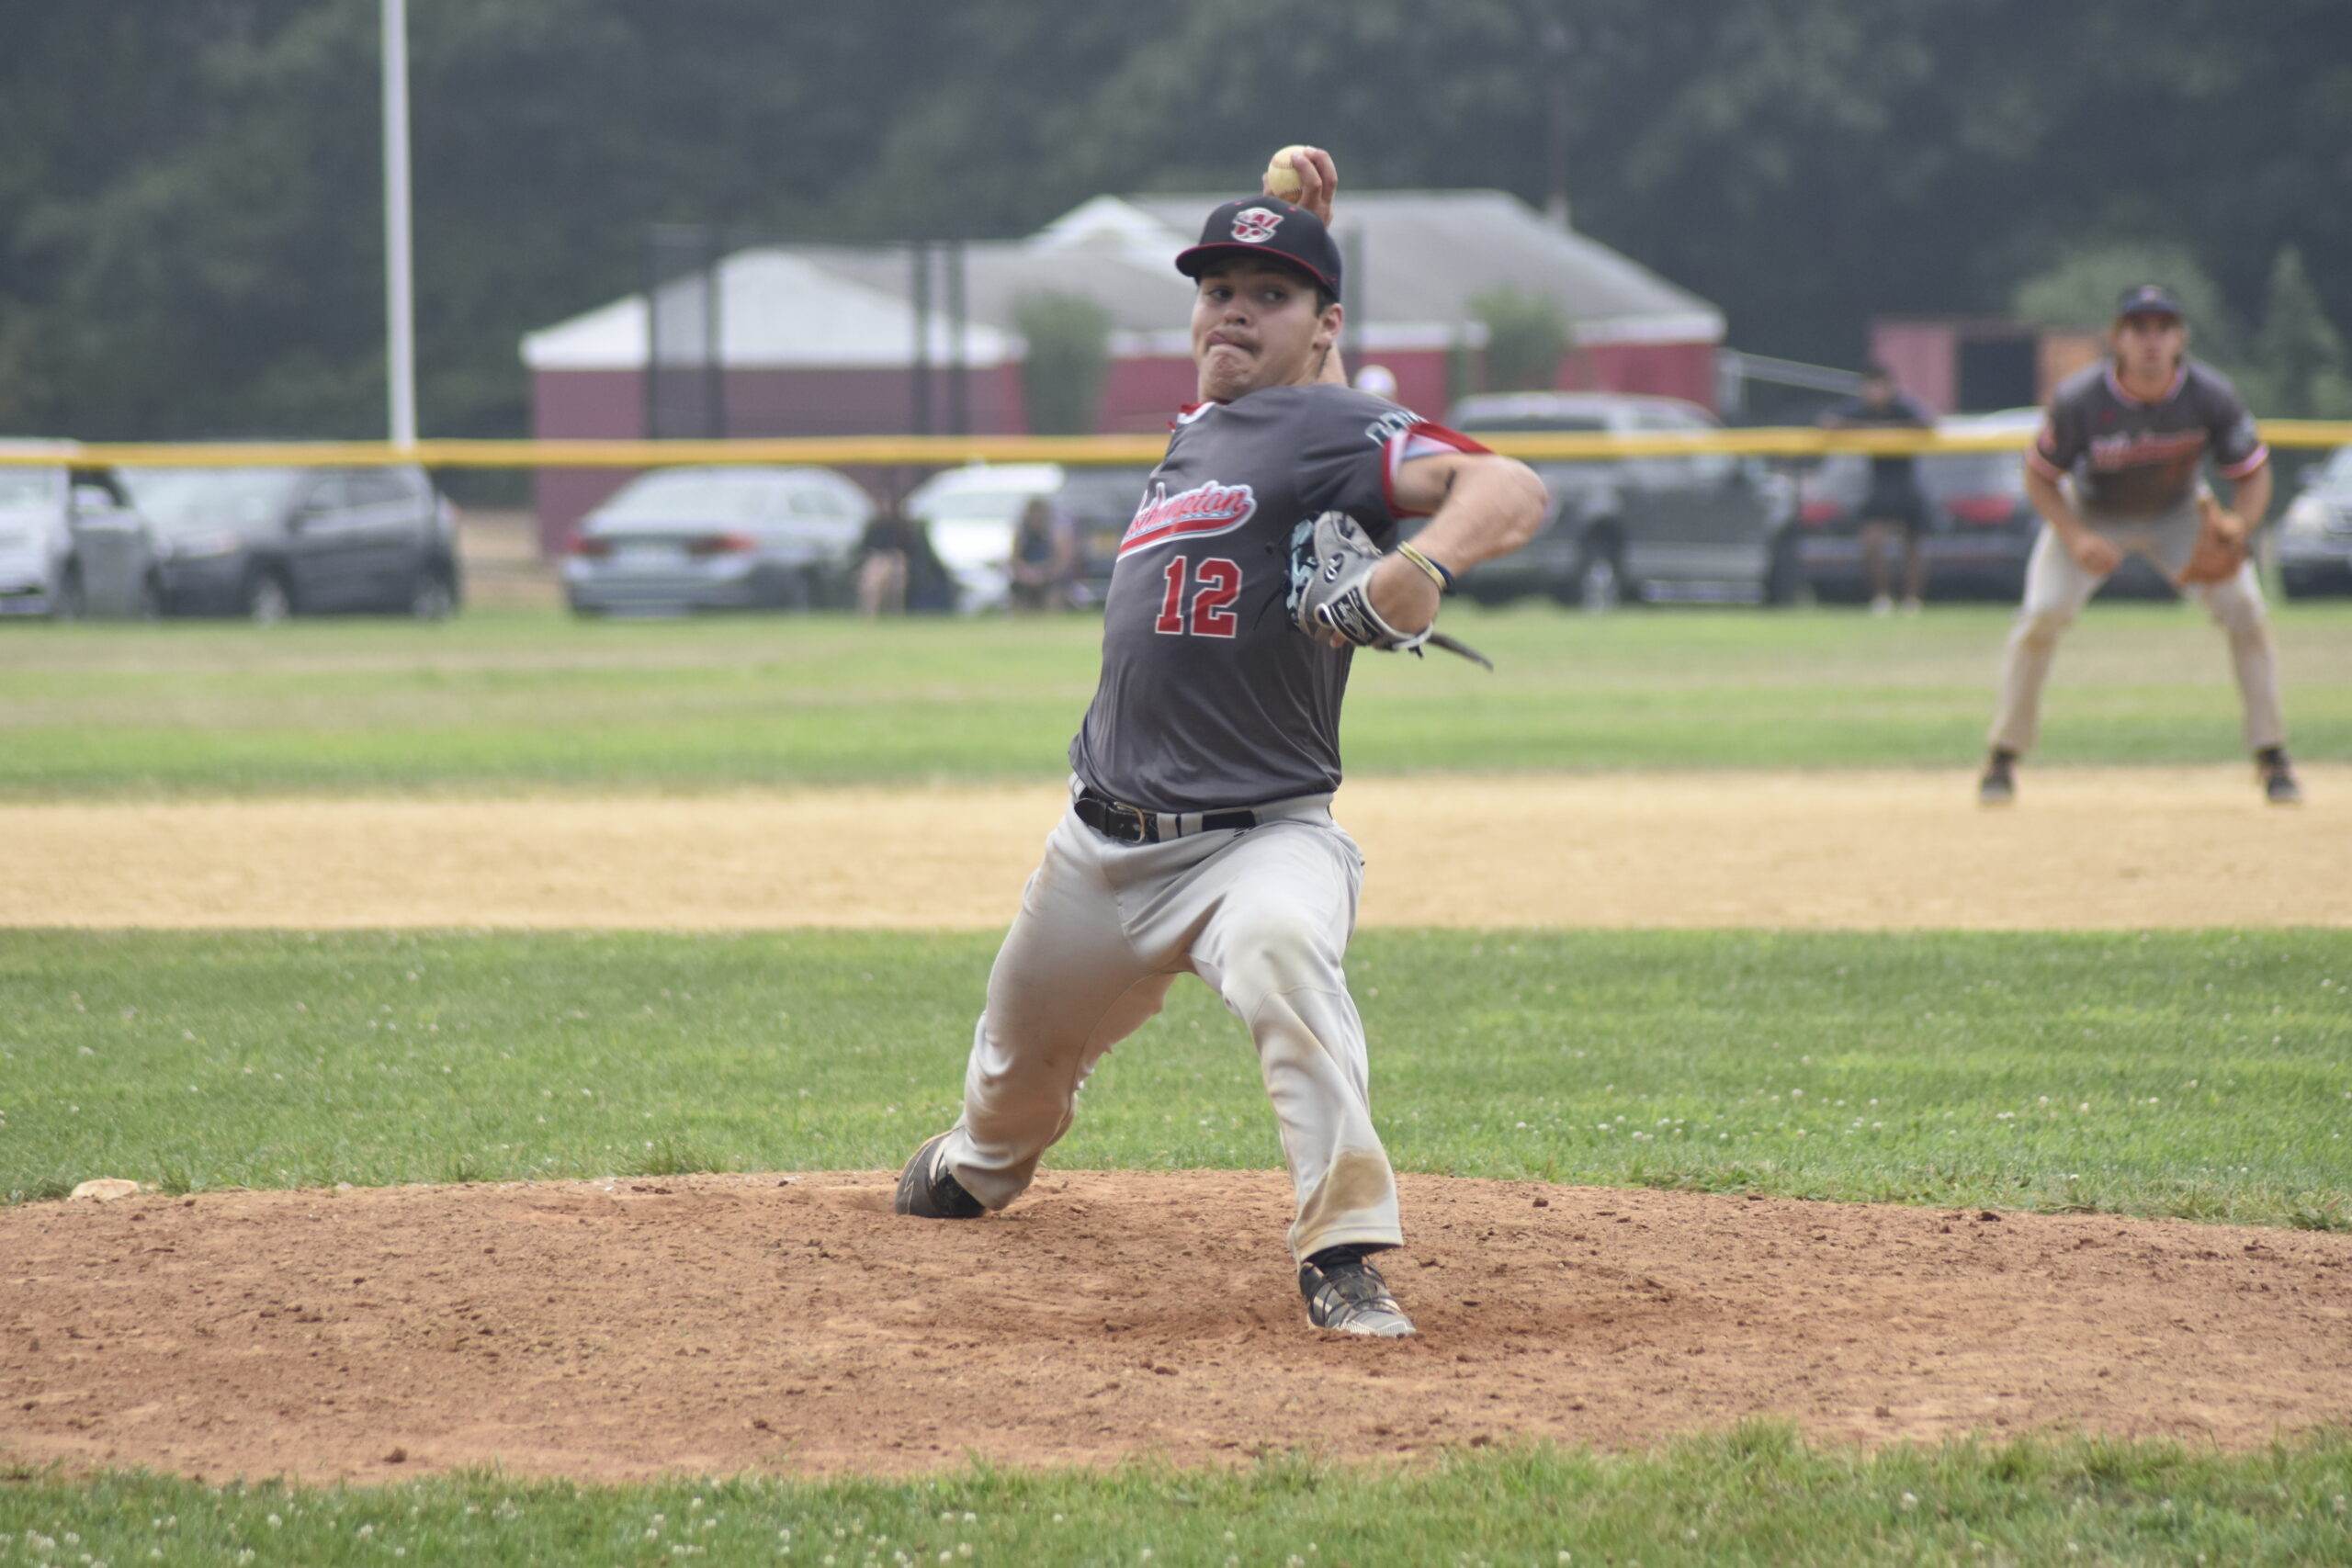 Sam Hill (UMass-Amherst) worked around loading the bases in the bottom of the ninth but nailed down the save to clinch the victory for Westhampton on Thursday, July 28.   DREW BUDD